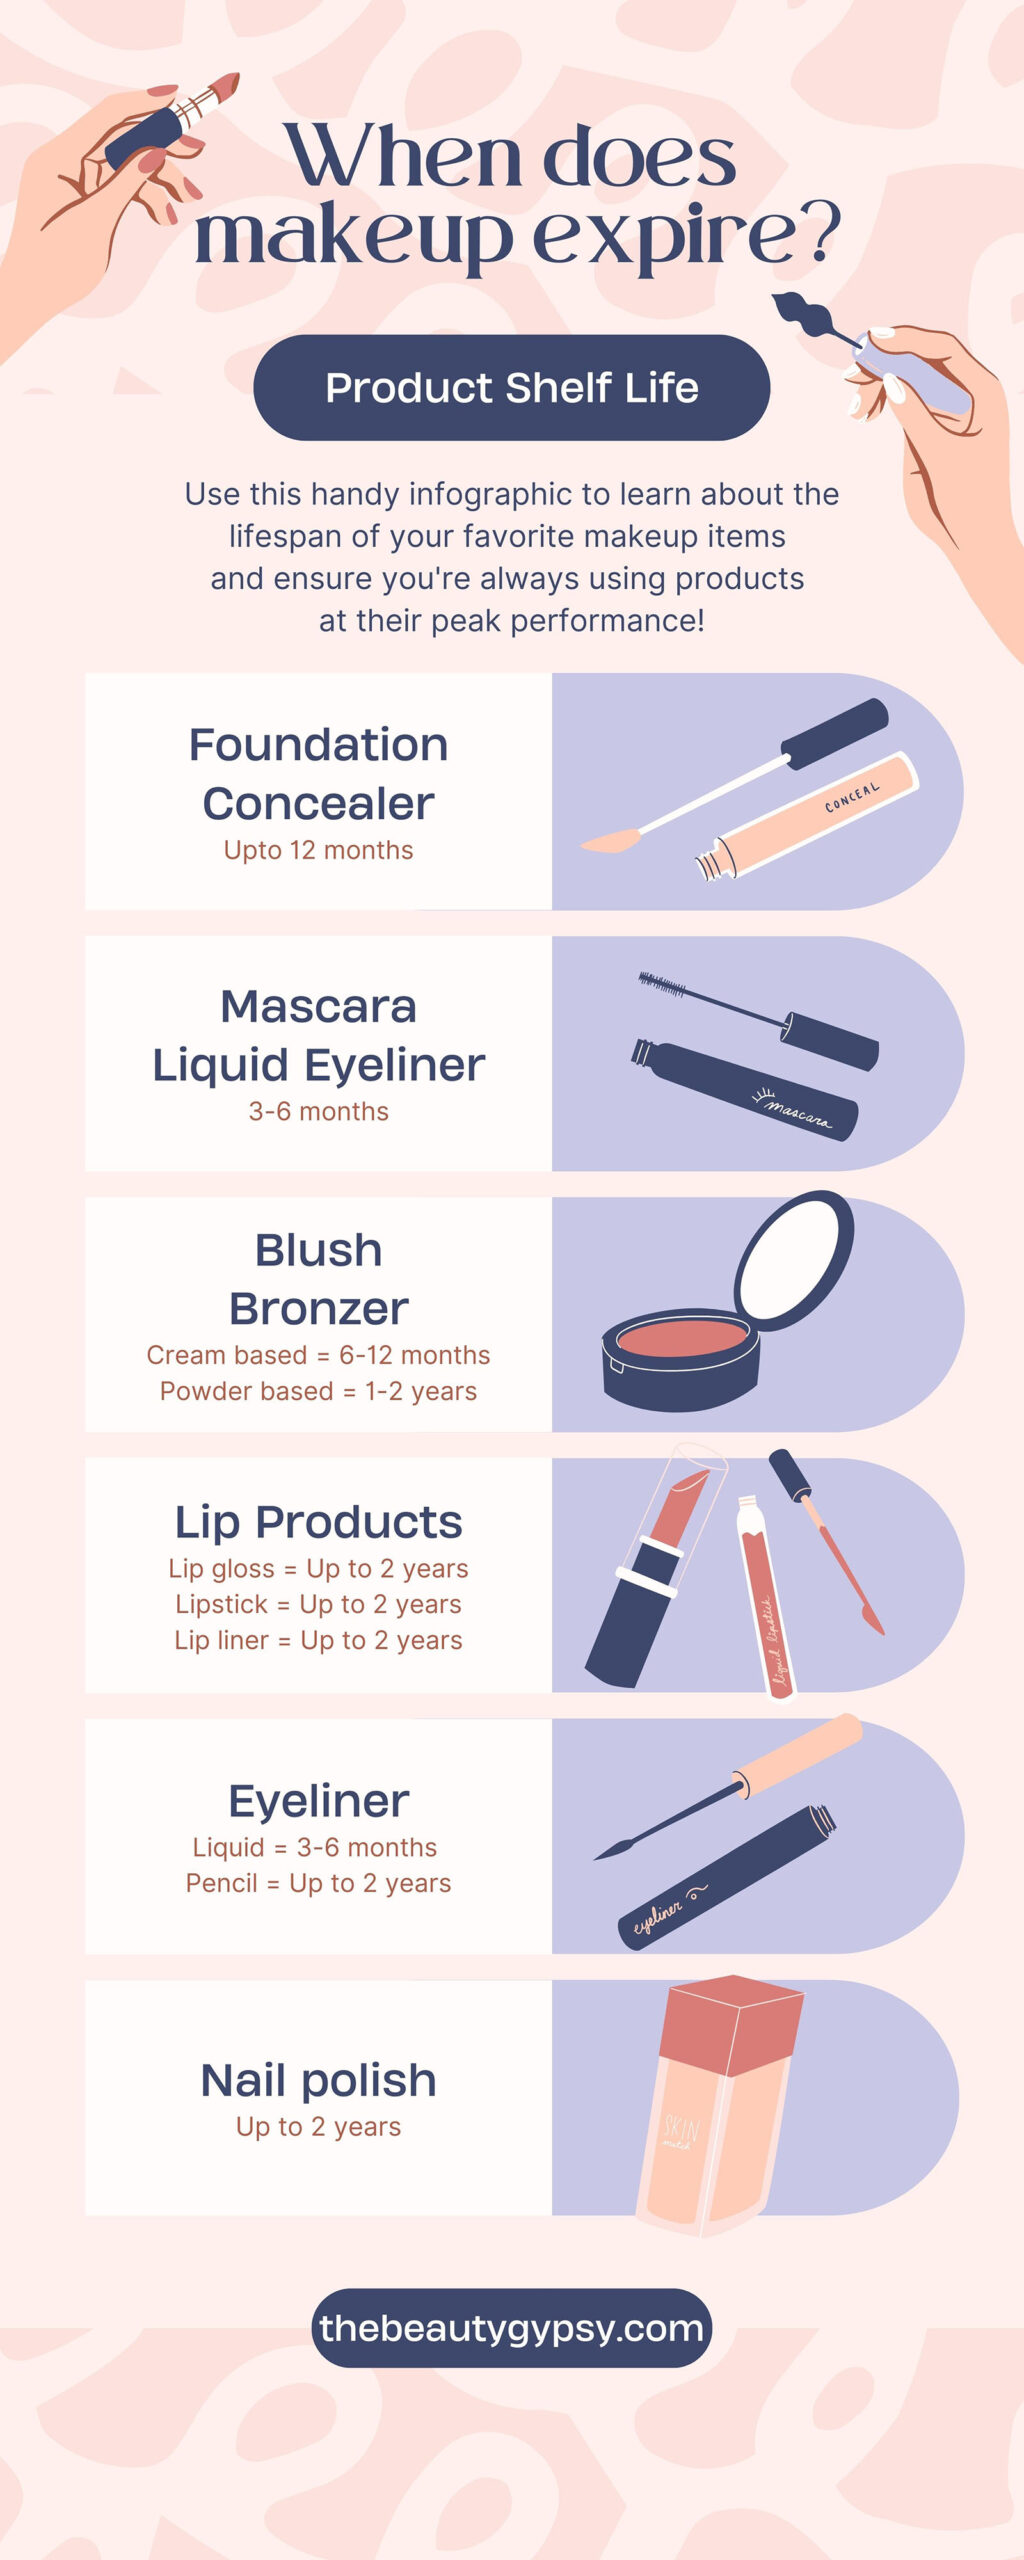 When And Why Does Makeup Expire